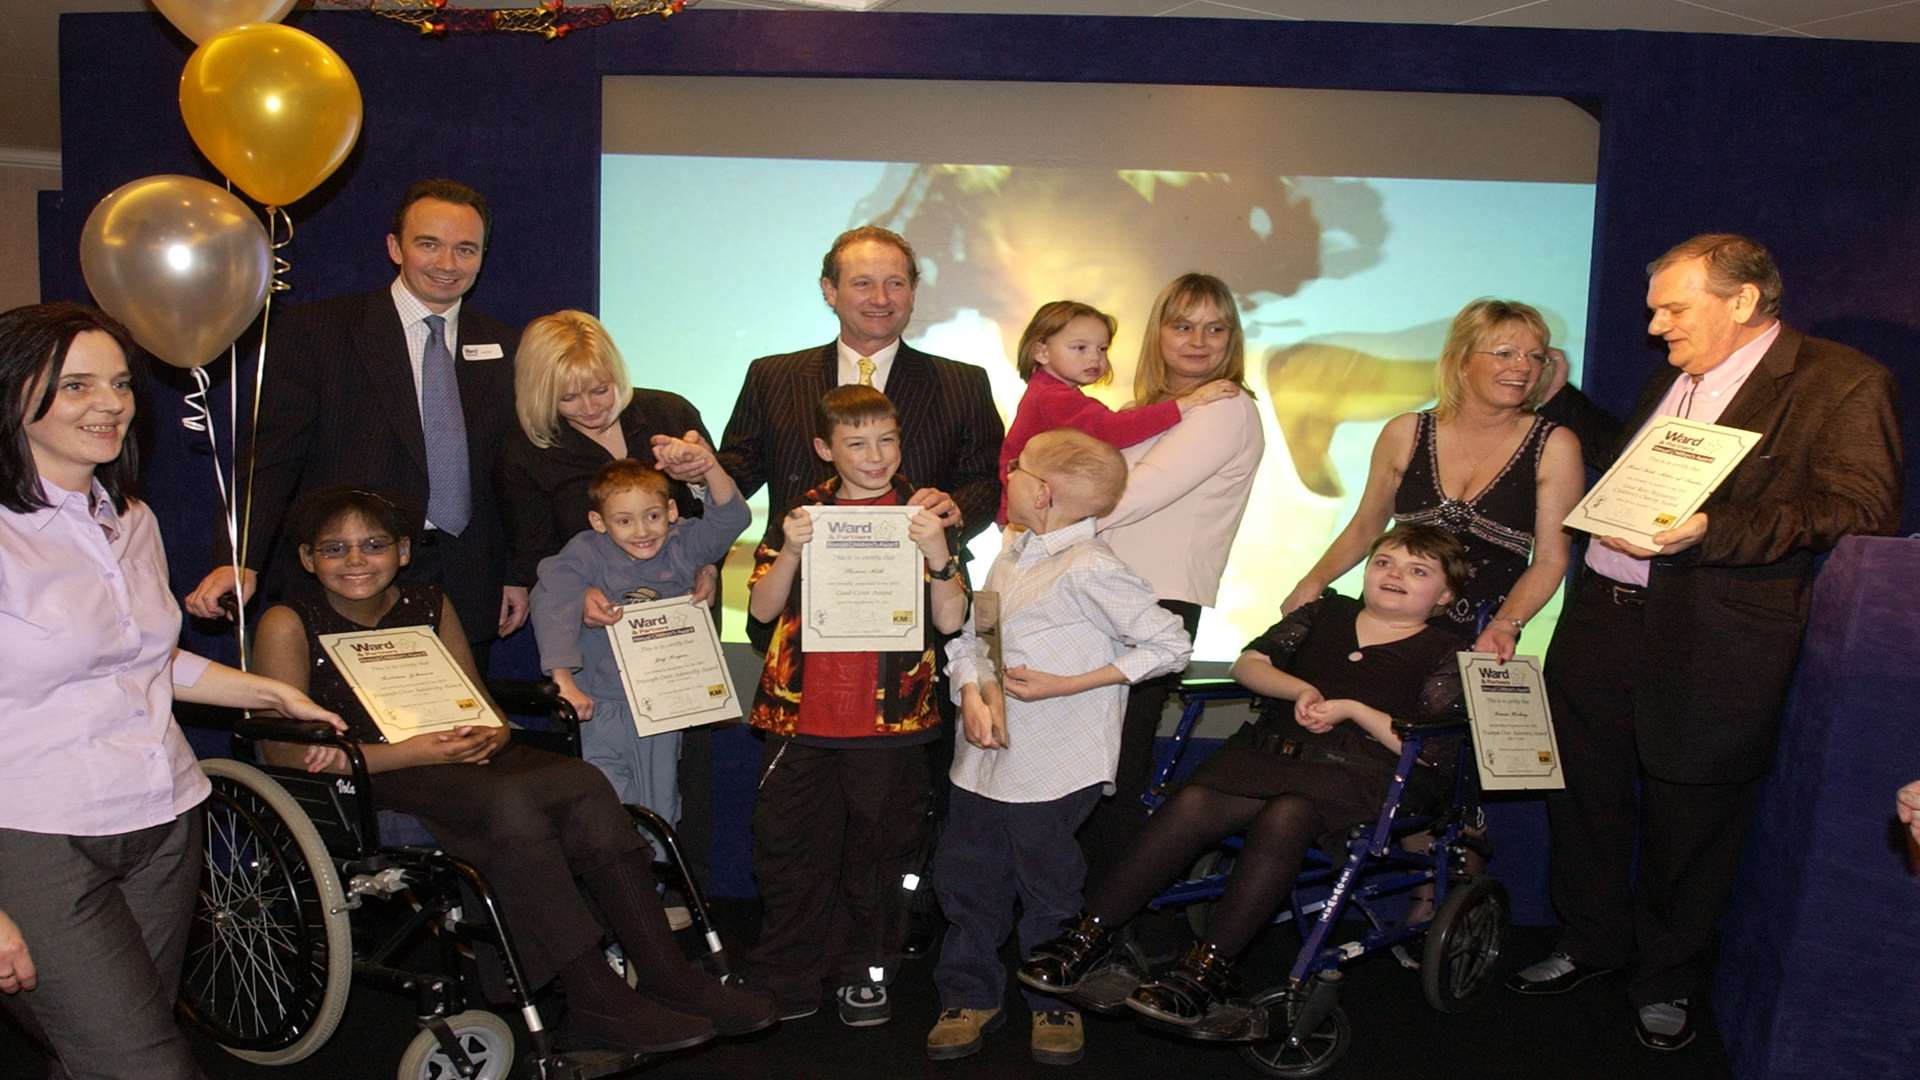 Big smiles from the winners of the first-ever Ward Children’s Awards in 2003